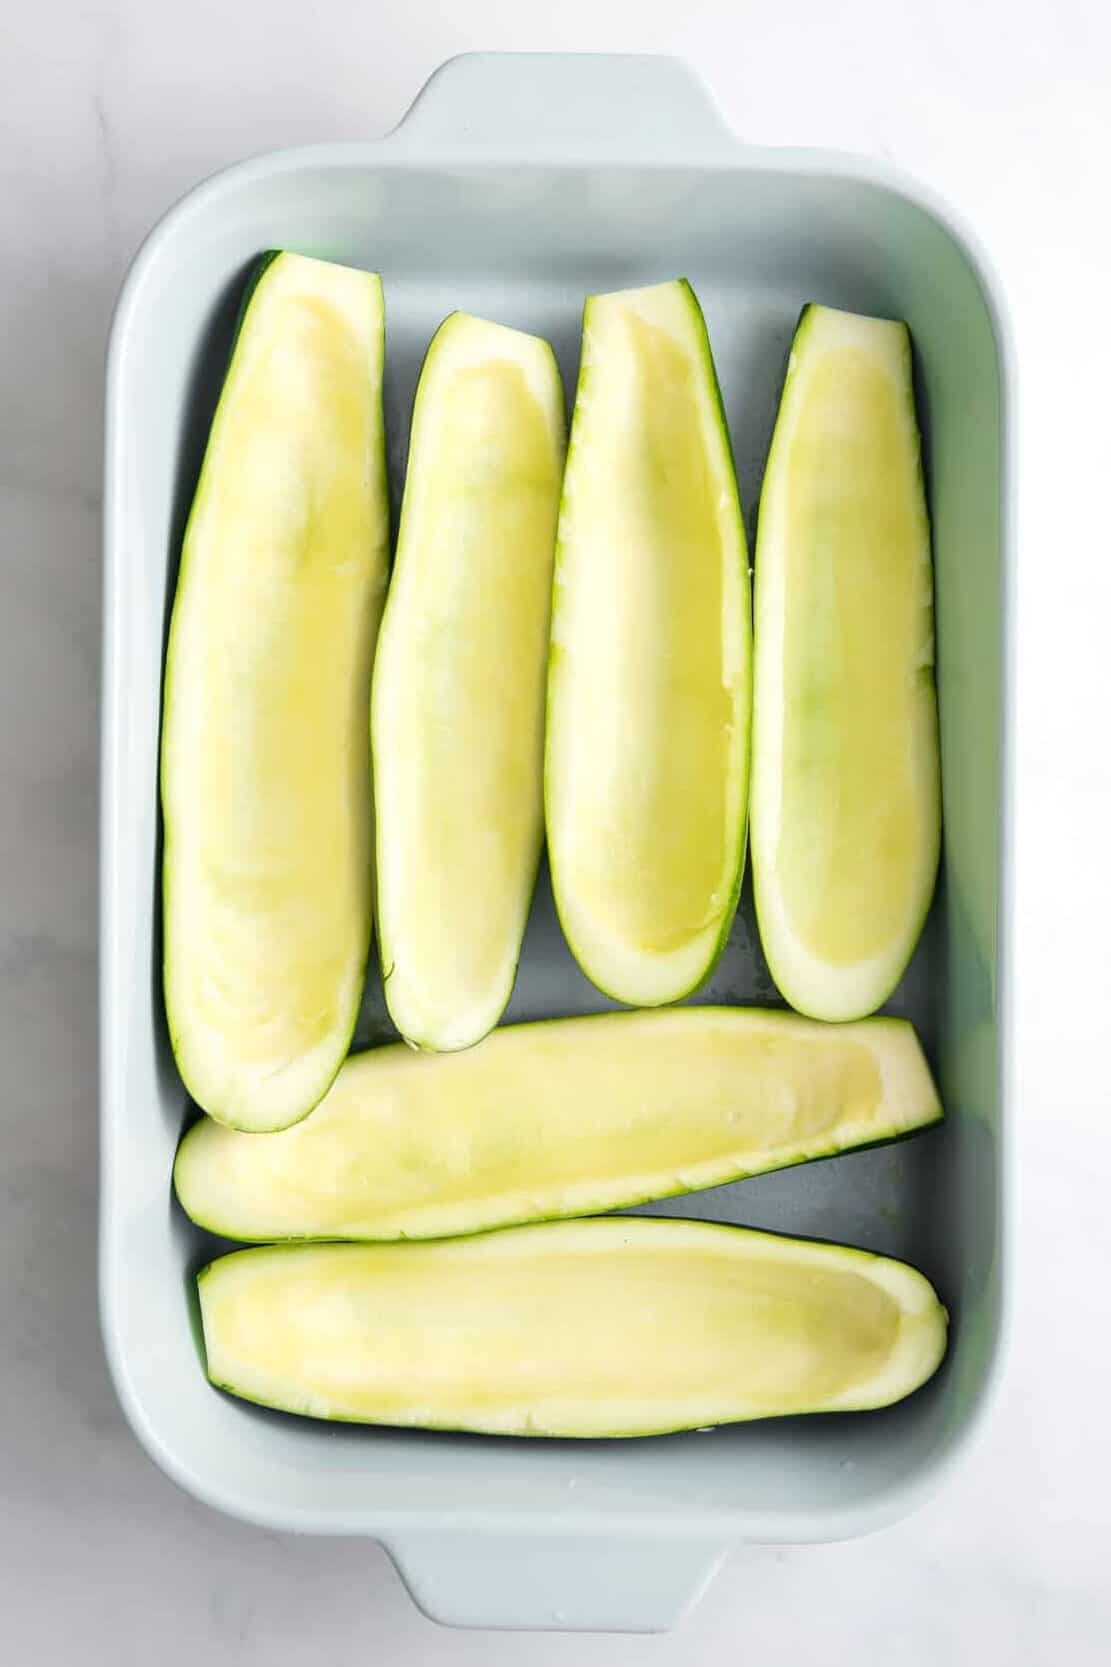 prepped zucchini with the inside flesh spooned out and lined in a blue 9x13 casserole dish